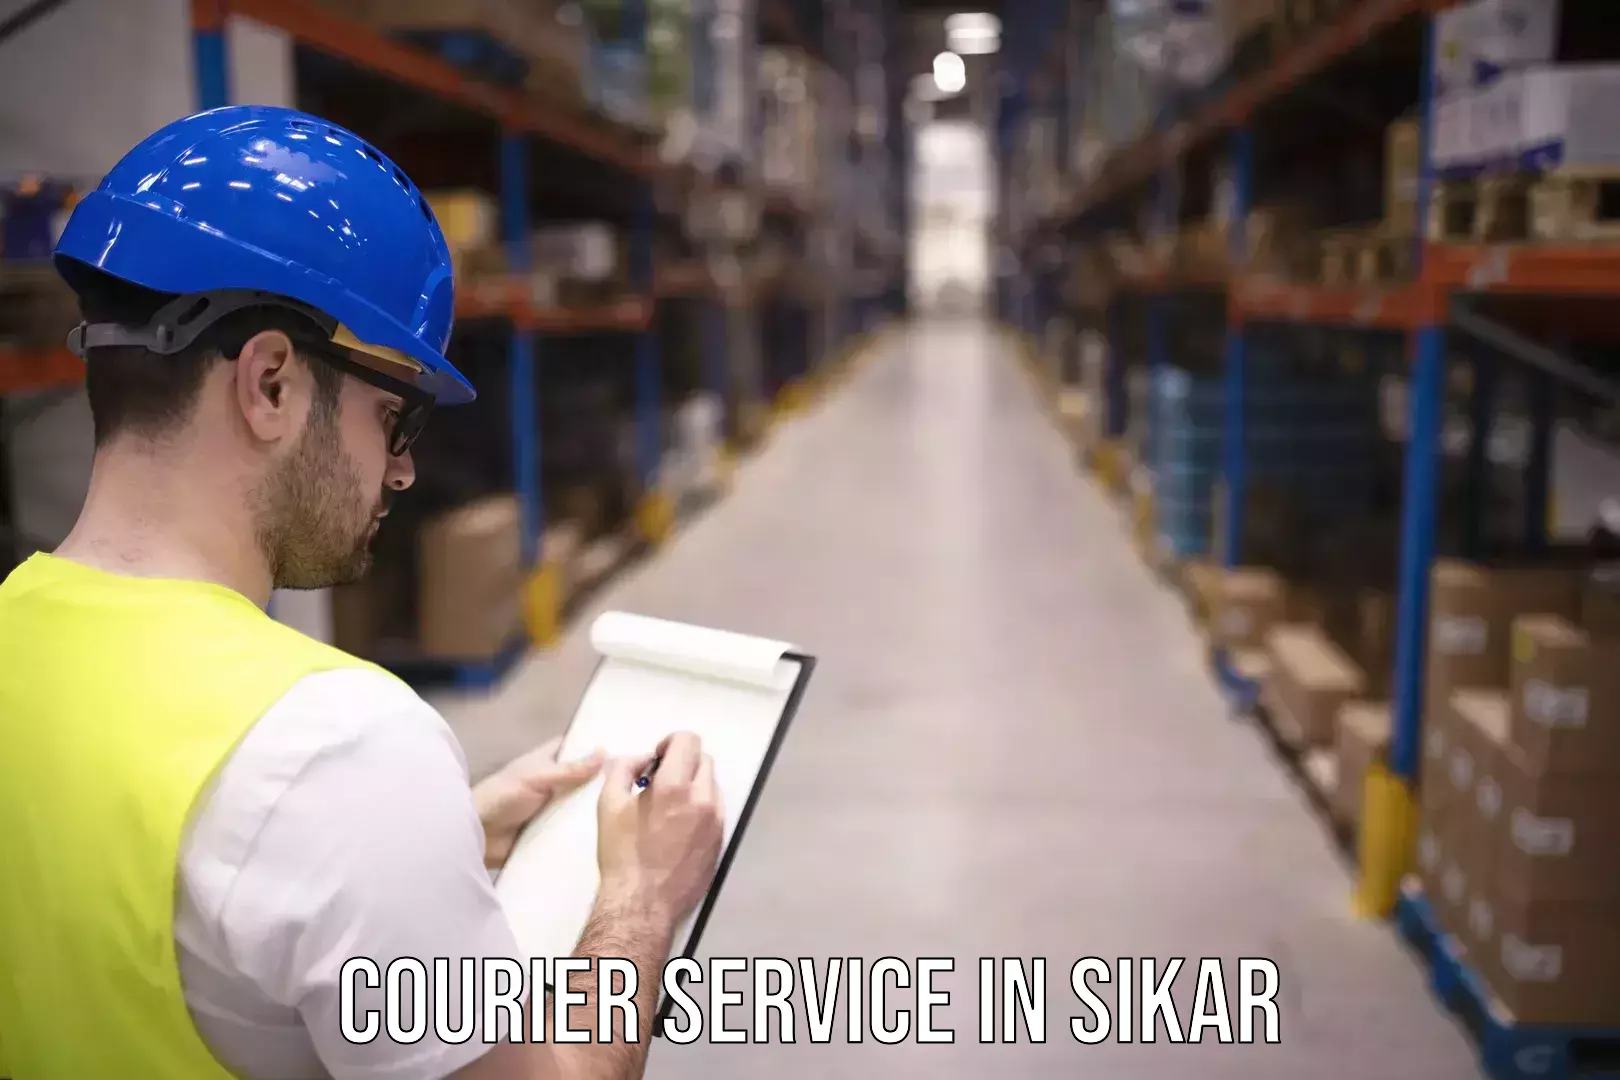 Courier service efficiency in Sikar